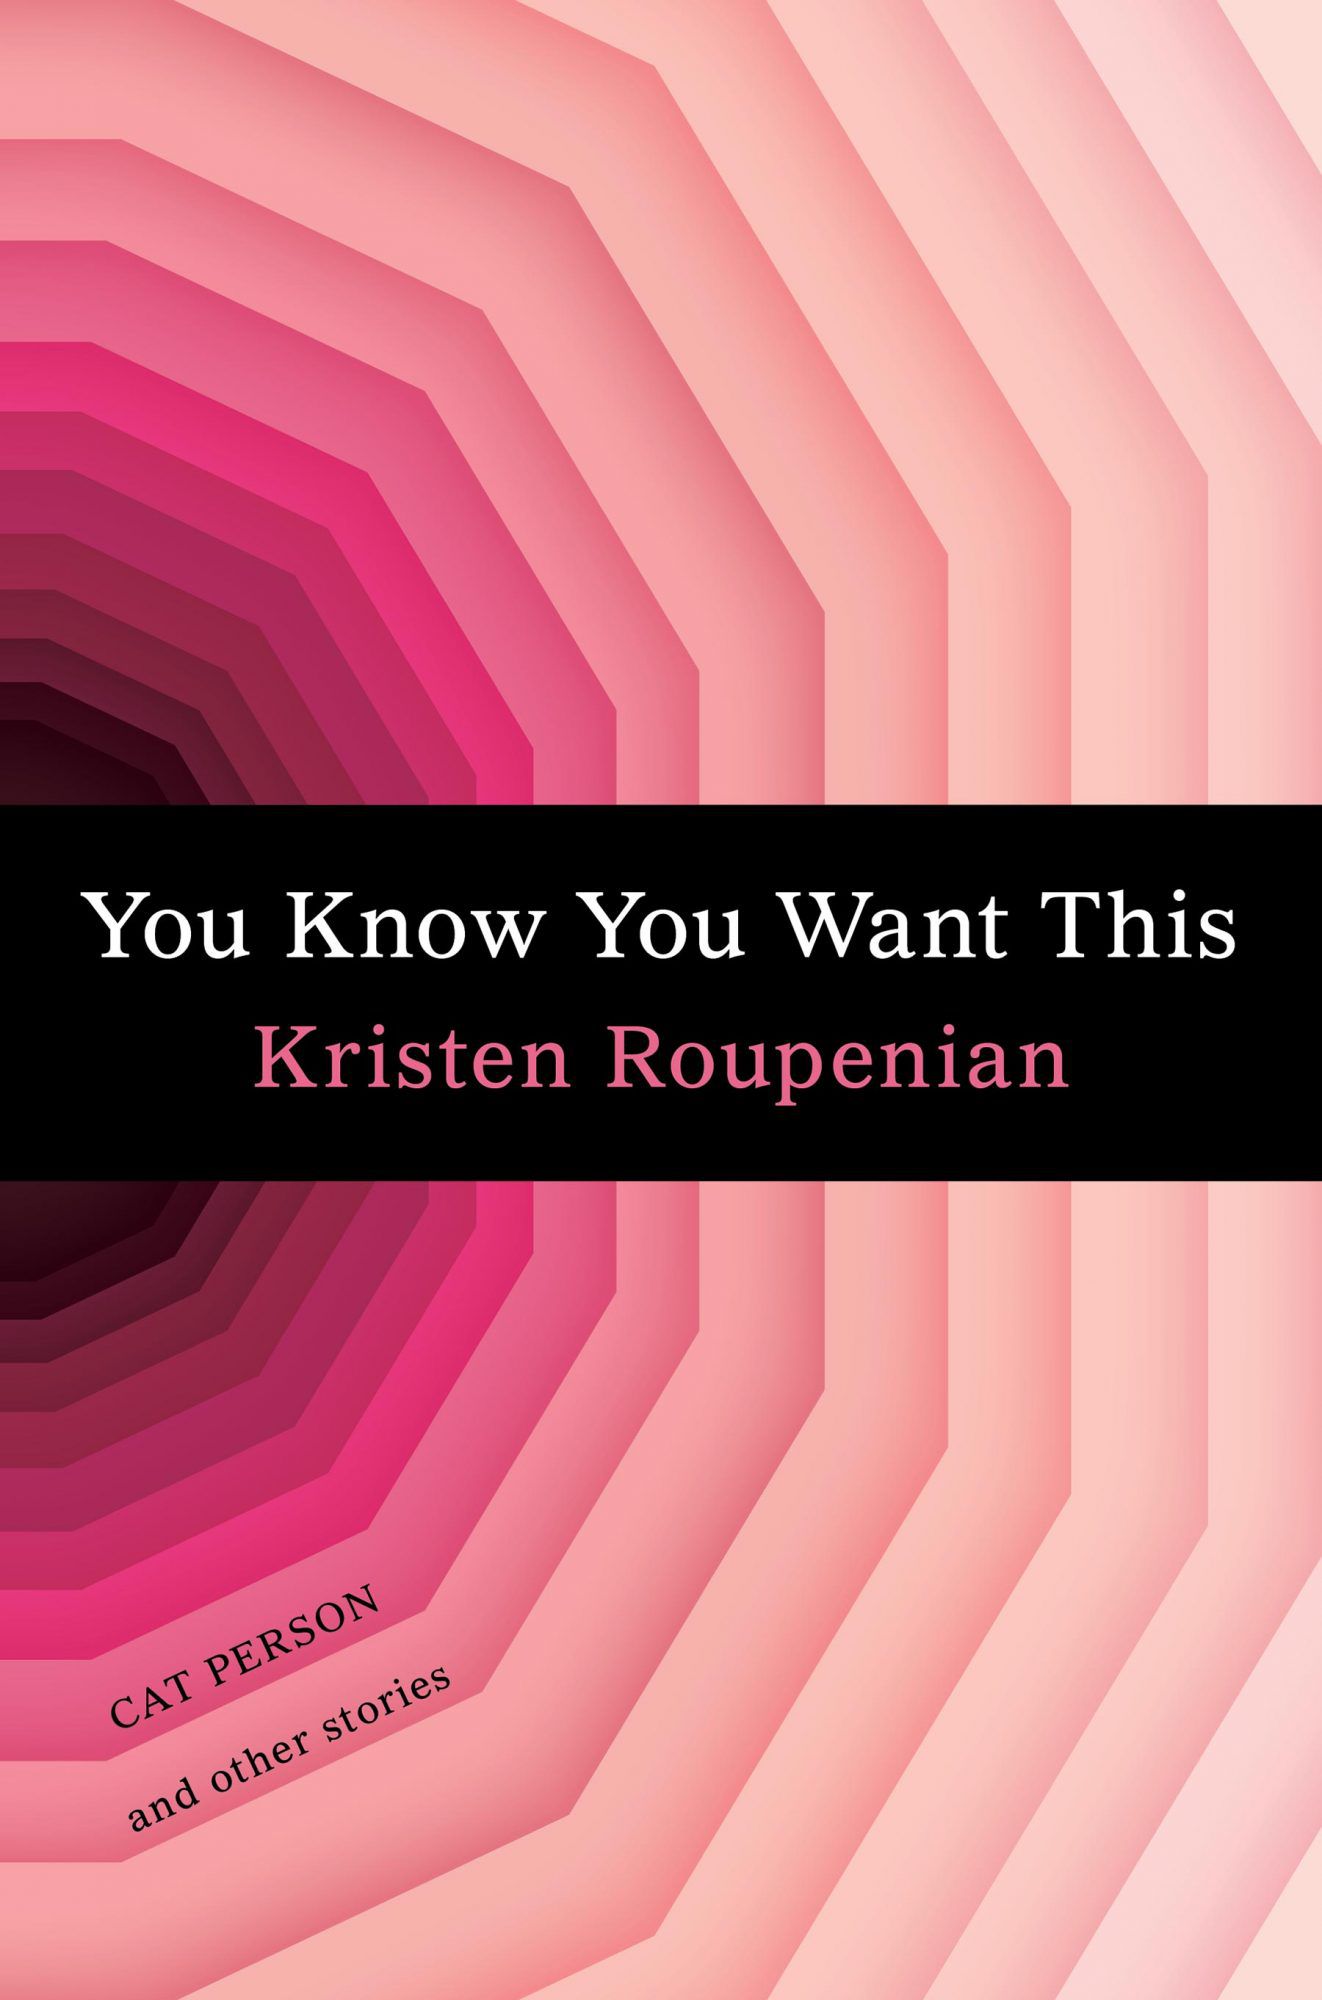 You Know You Want This by Kristen RoupenianCredit: Scout Press